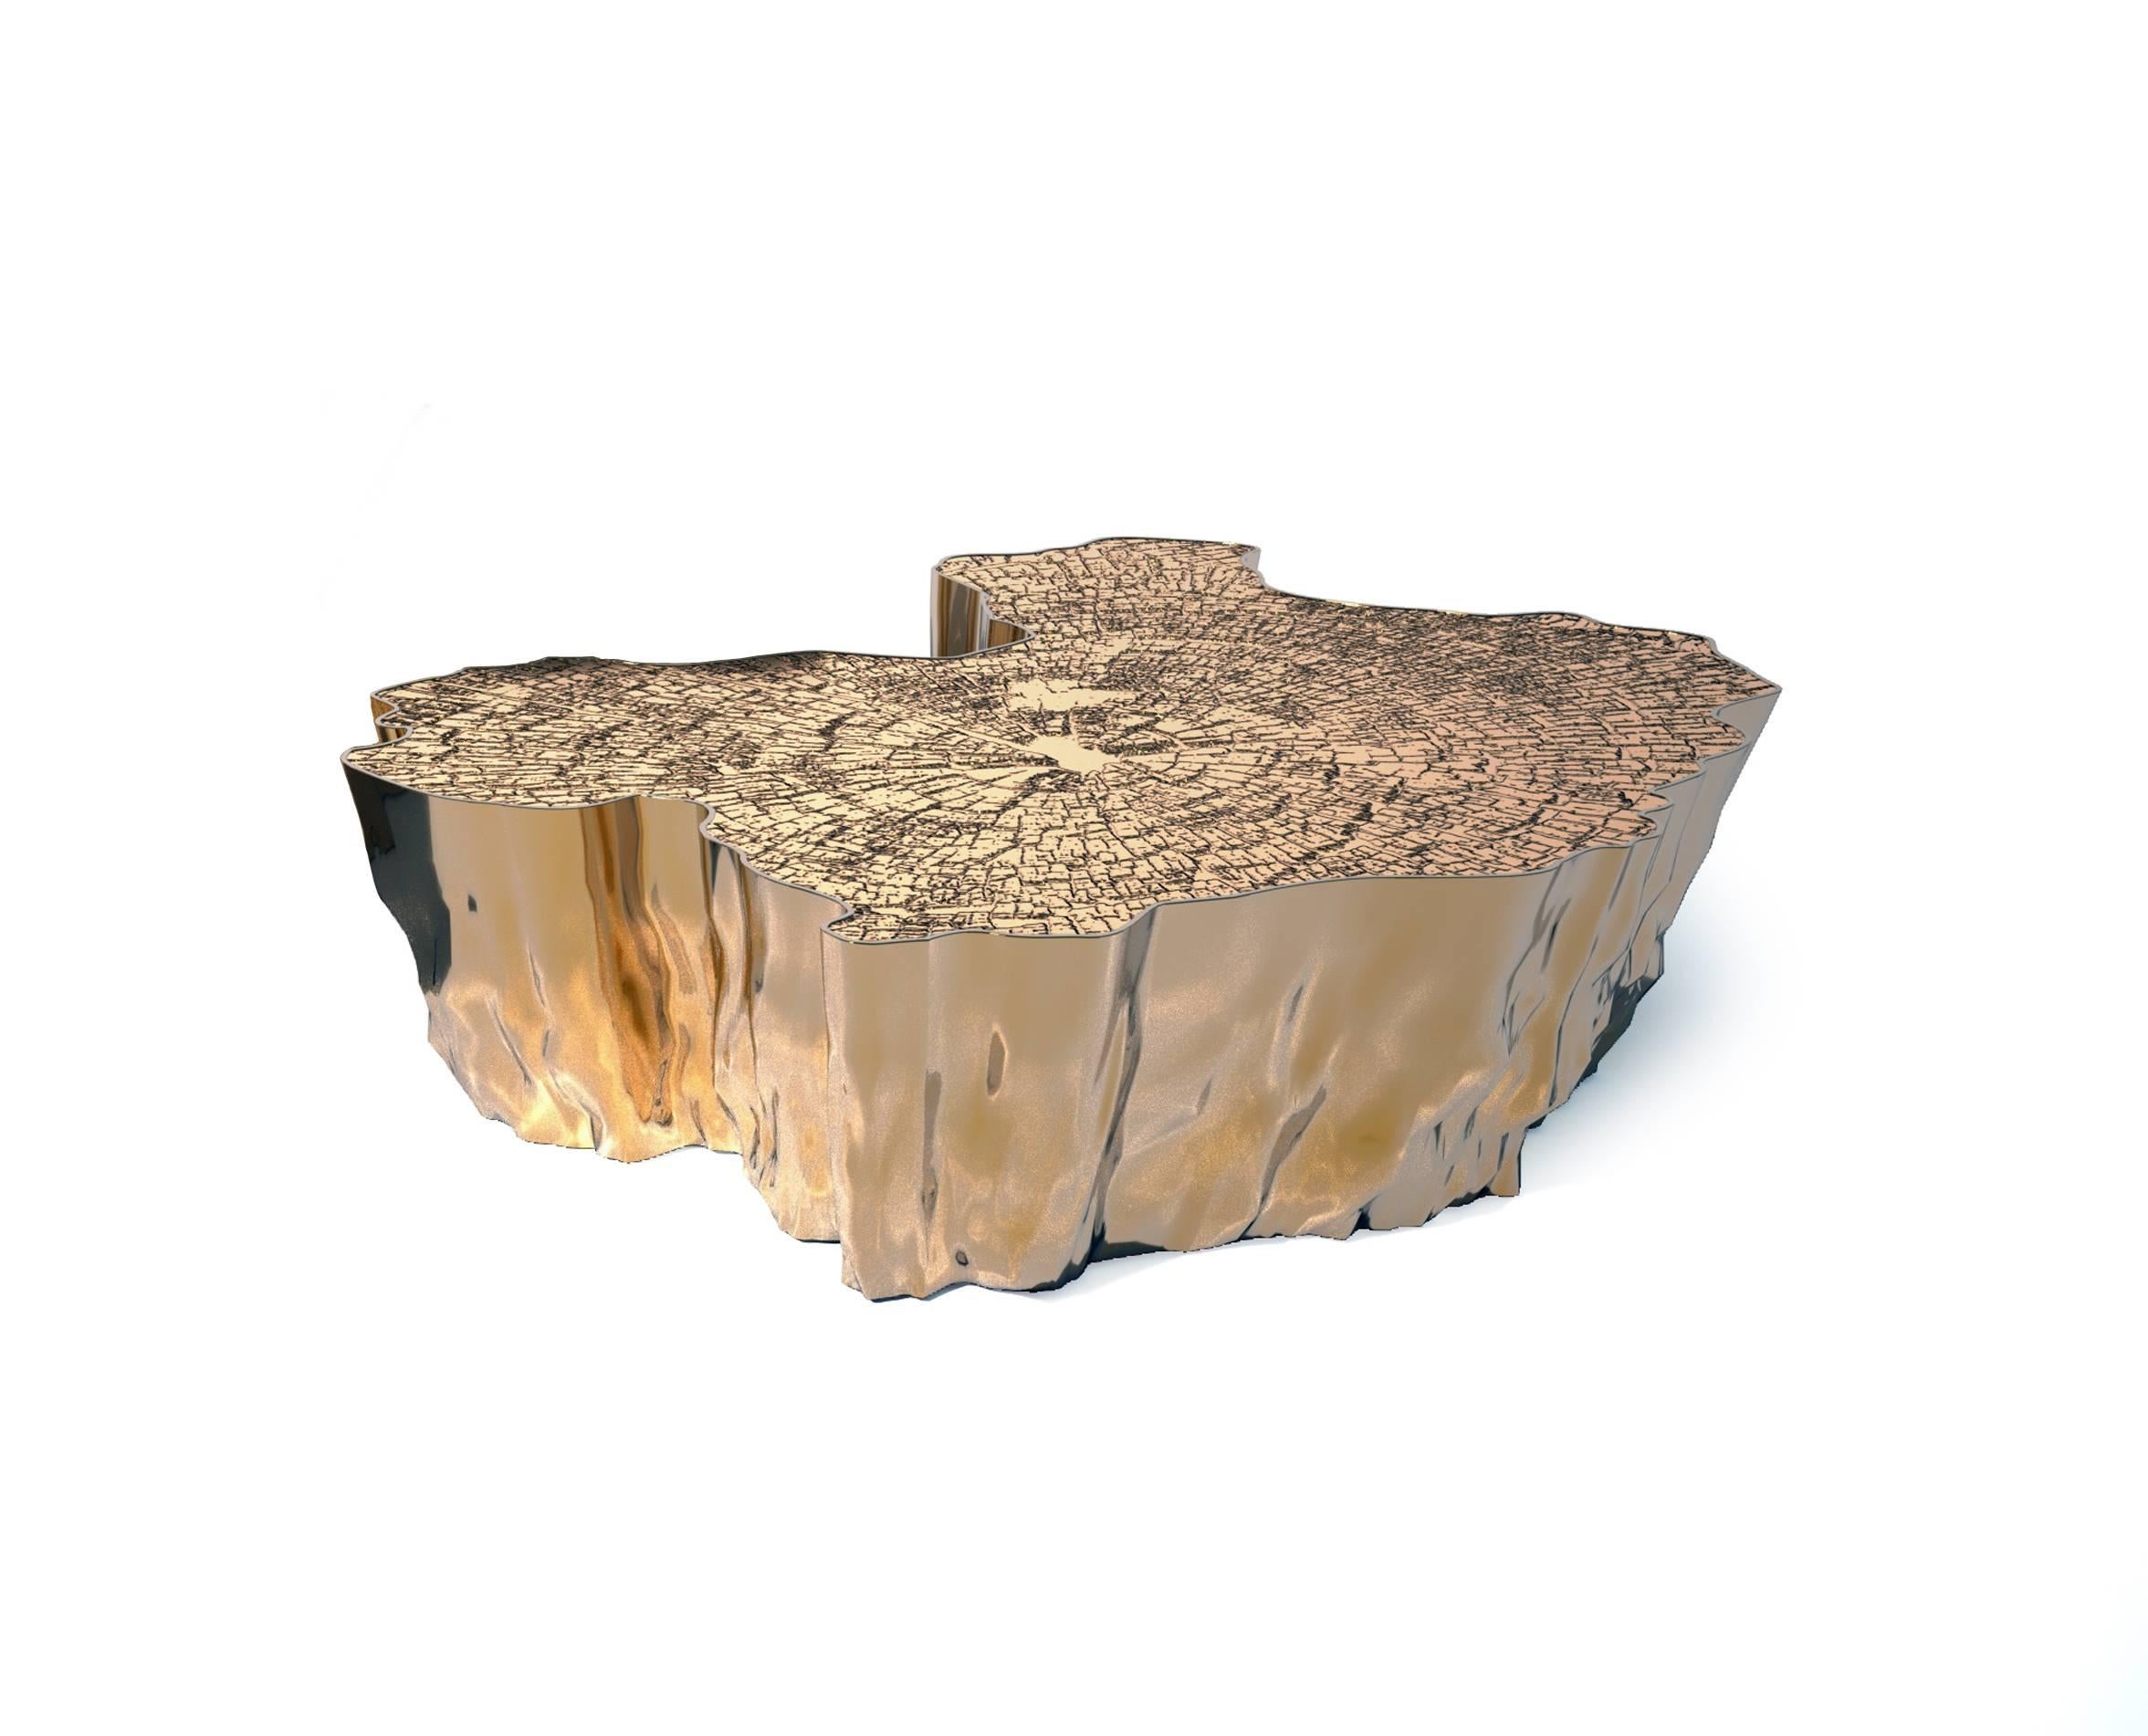 Boca do Lobo makes interior spaces come alive. That’s why we have recreated the elegant Eden Table, made with superior craftsmanship. The present version is made from melted aluminium that can be finished in copper leaf, gold leaf or silver leaf.